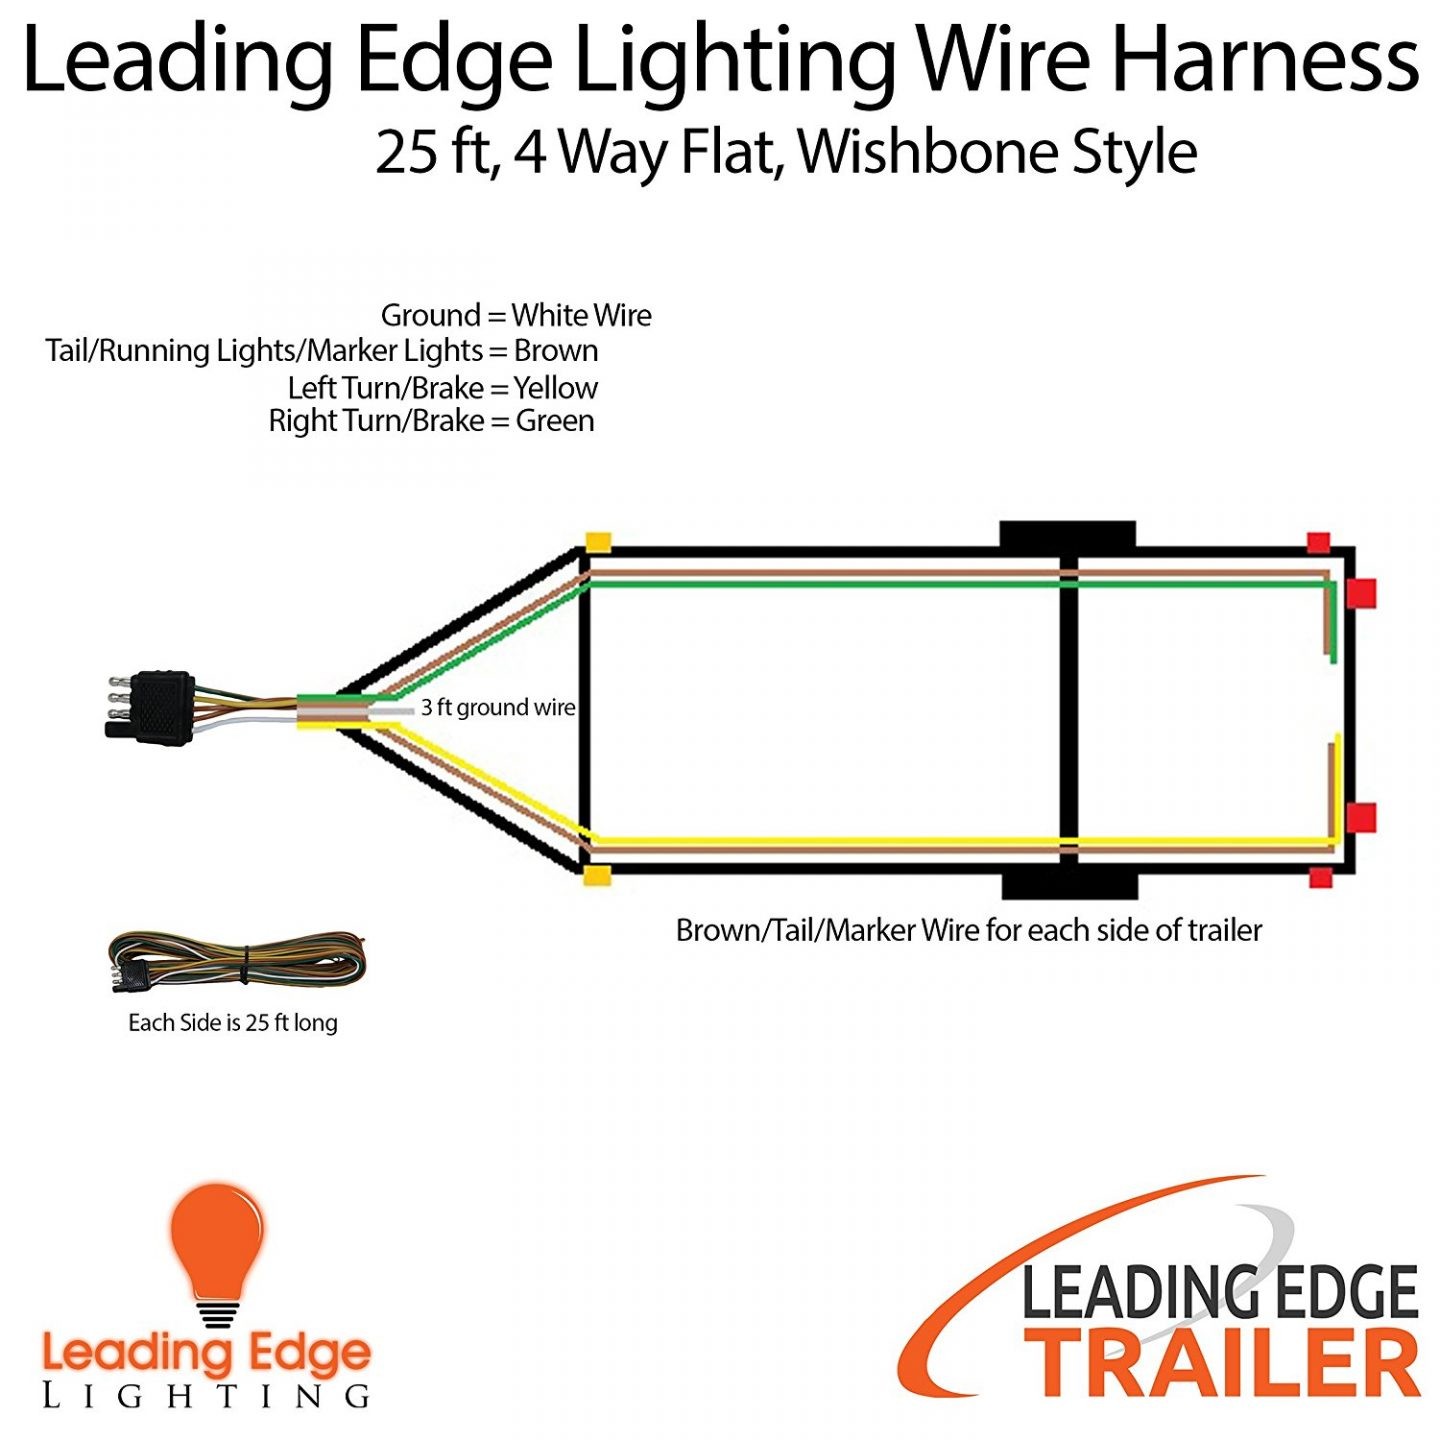 Diagramrailer Lights Wiring Wire Pin Connector Light Way Plug And Trailer Diagram 4 Wires Electrical Circuit